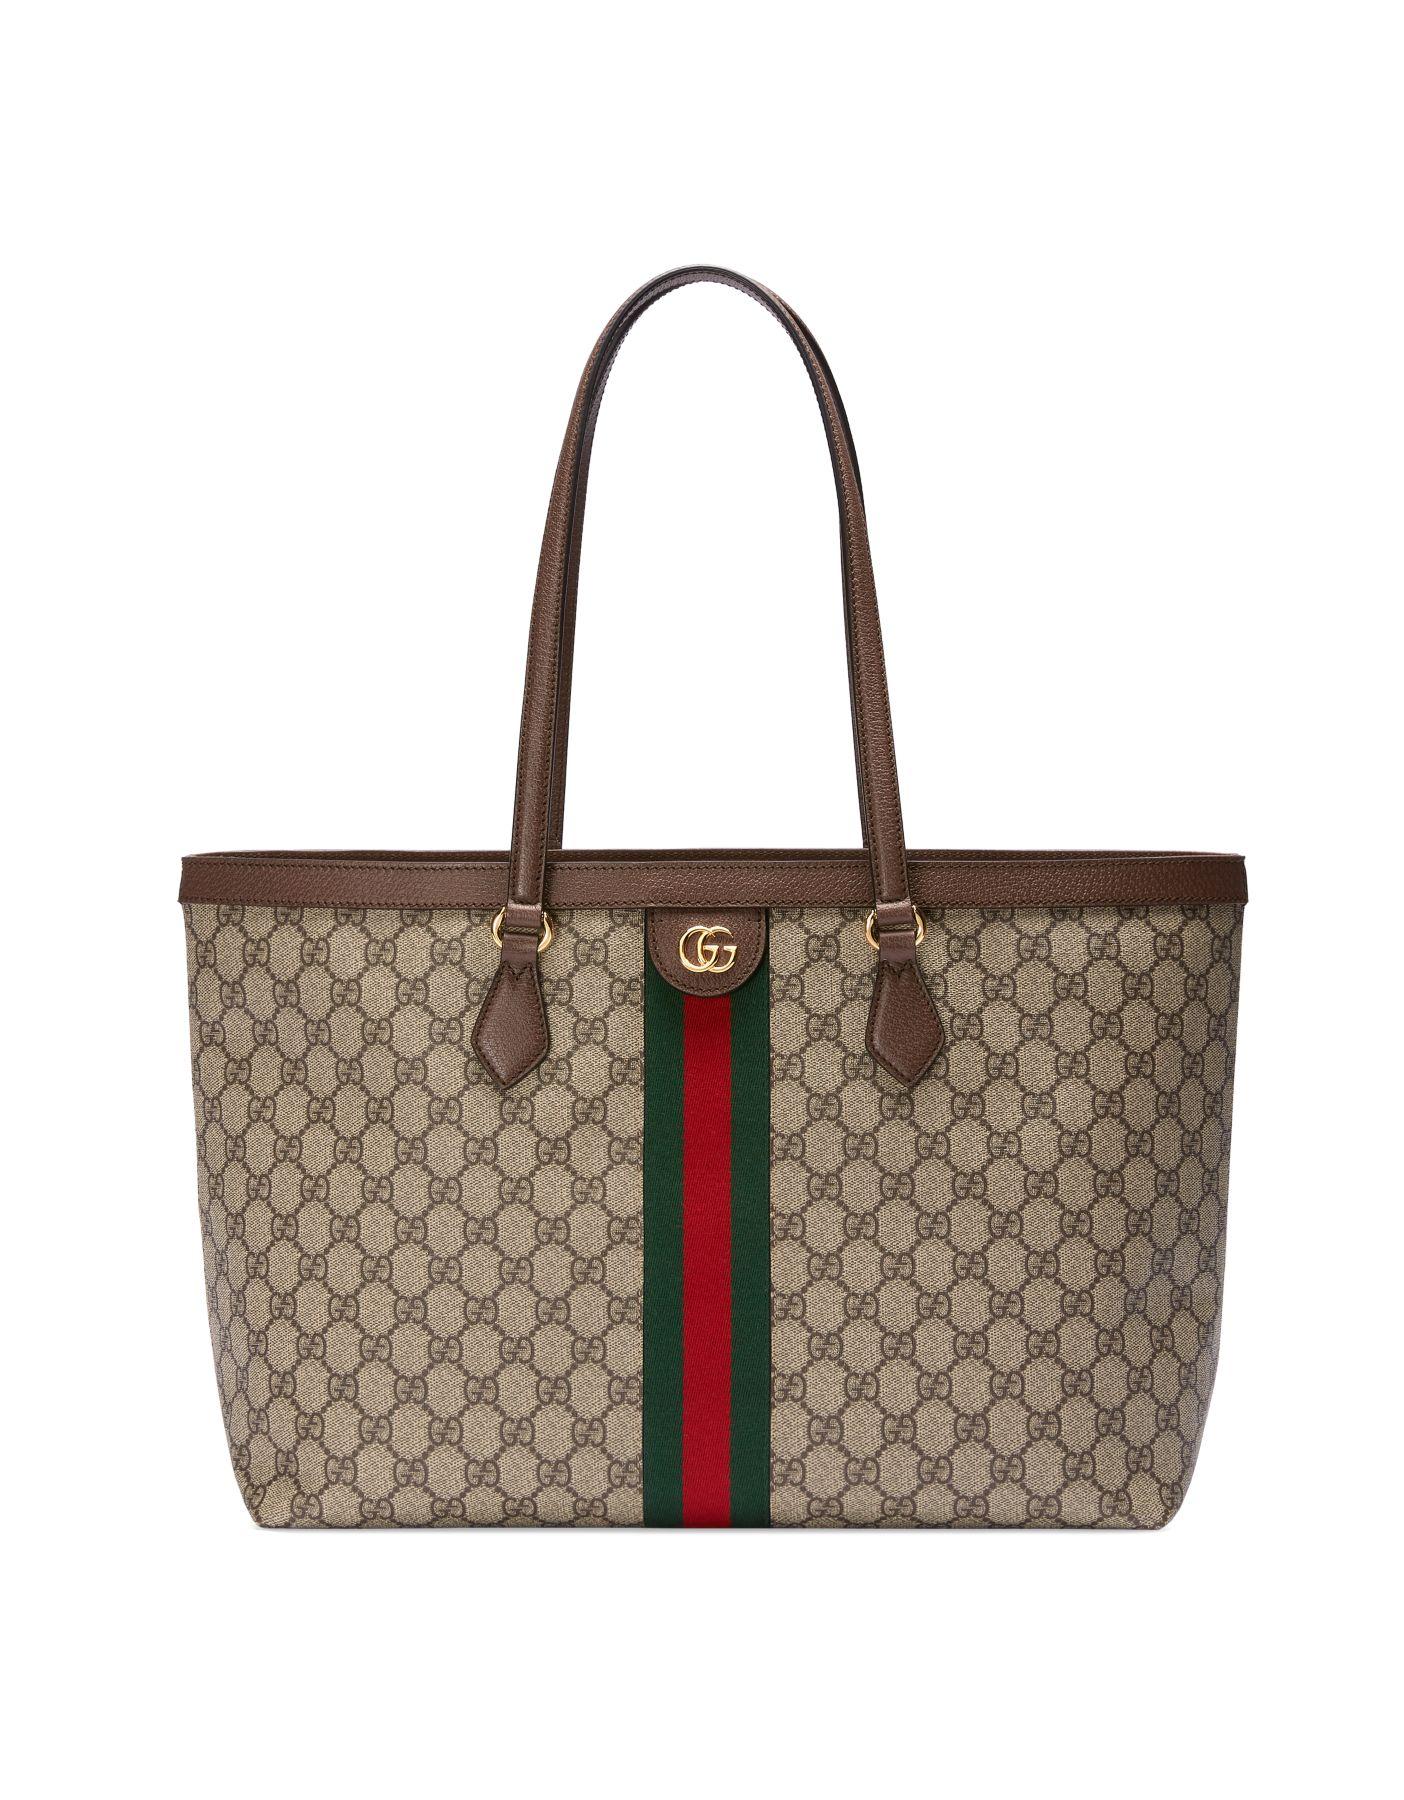 Gucci Ophidia GG Medium Tote in Brown - Lyst